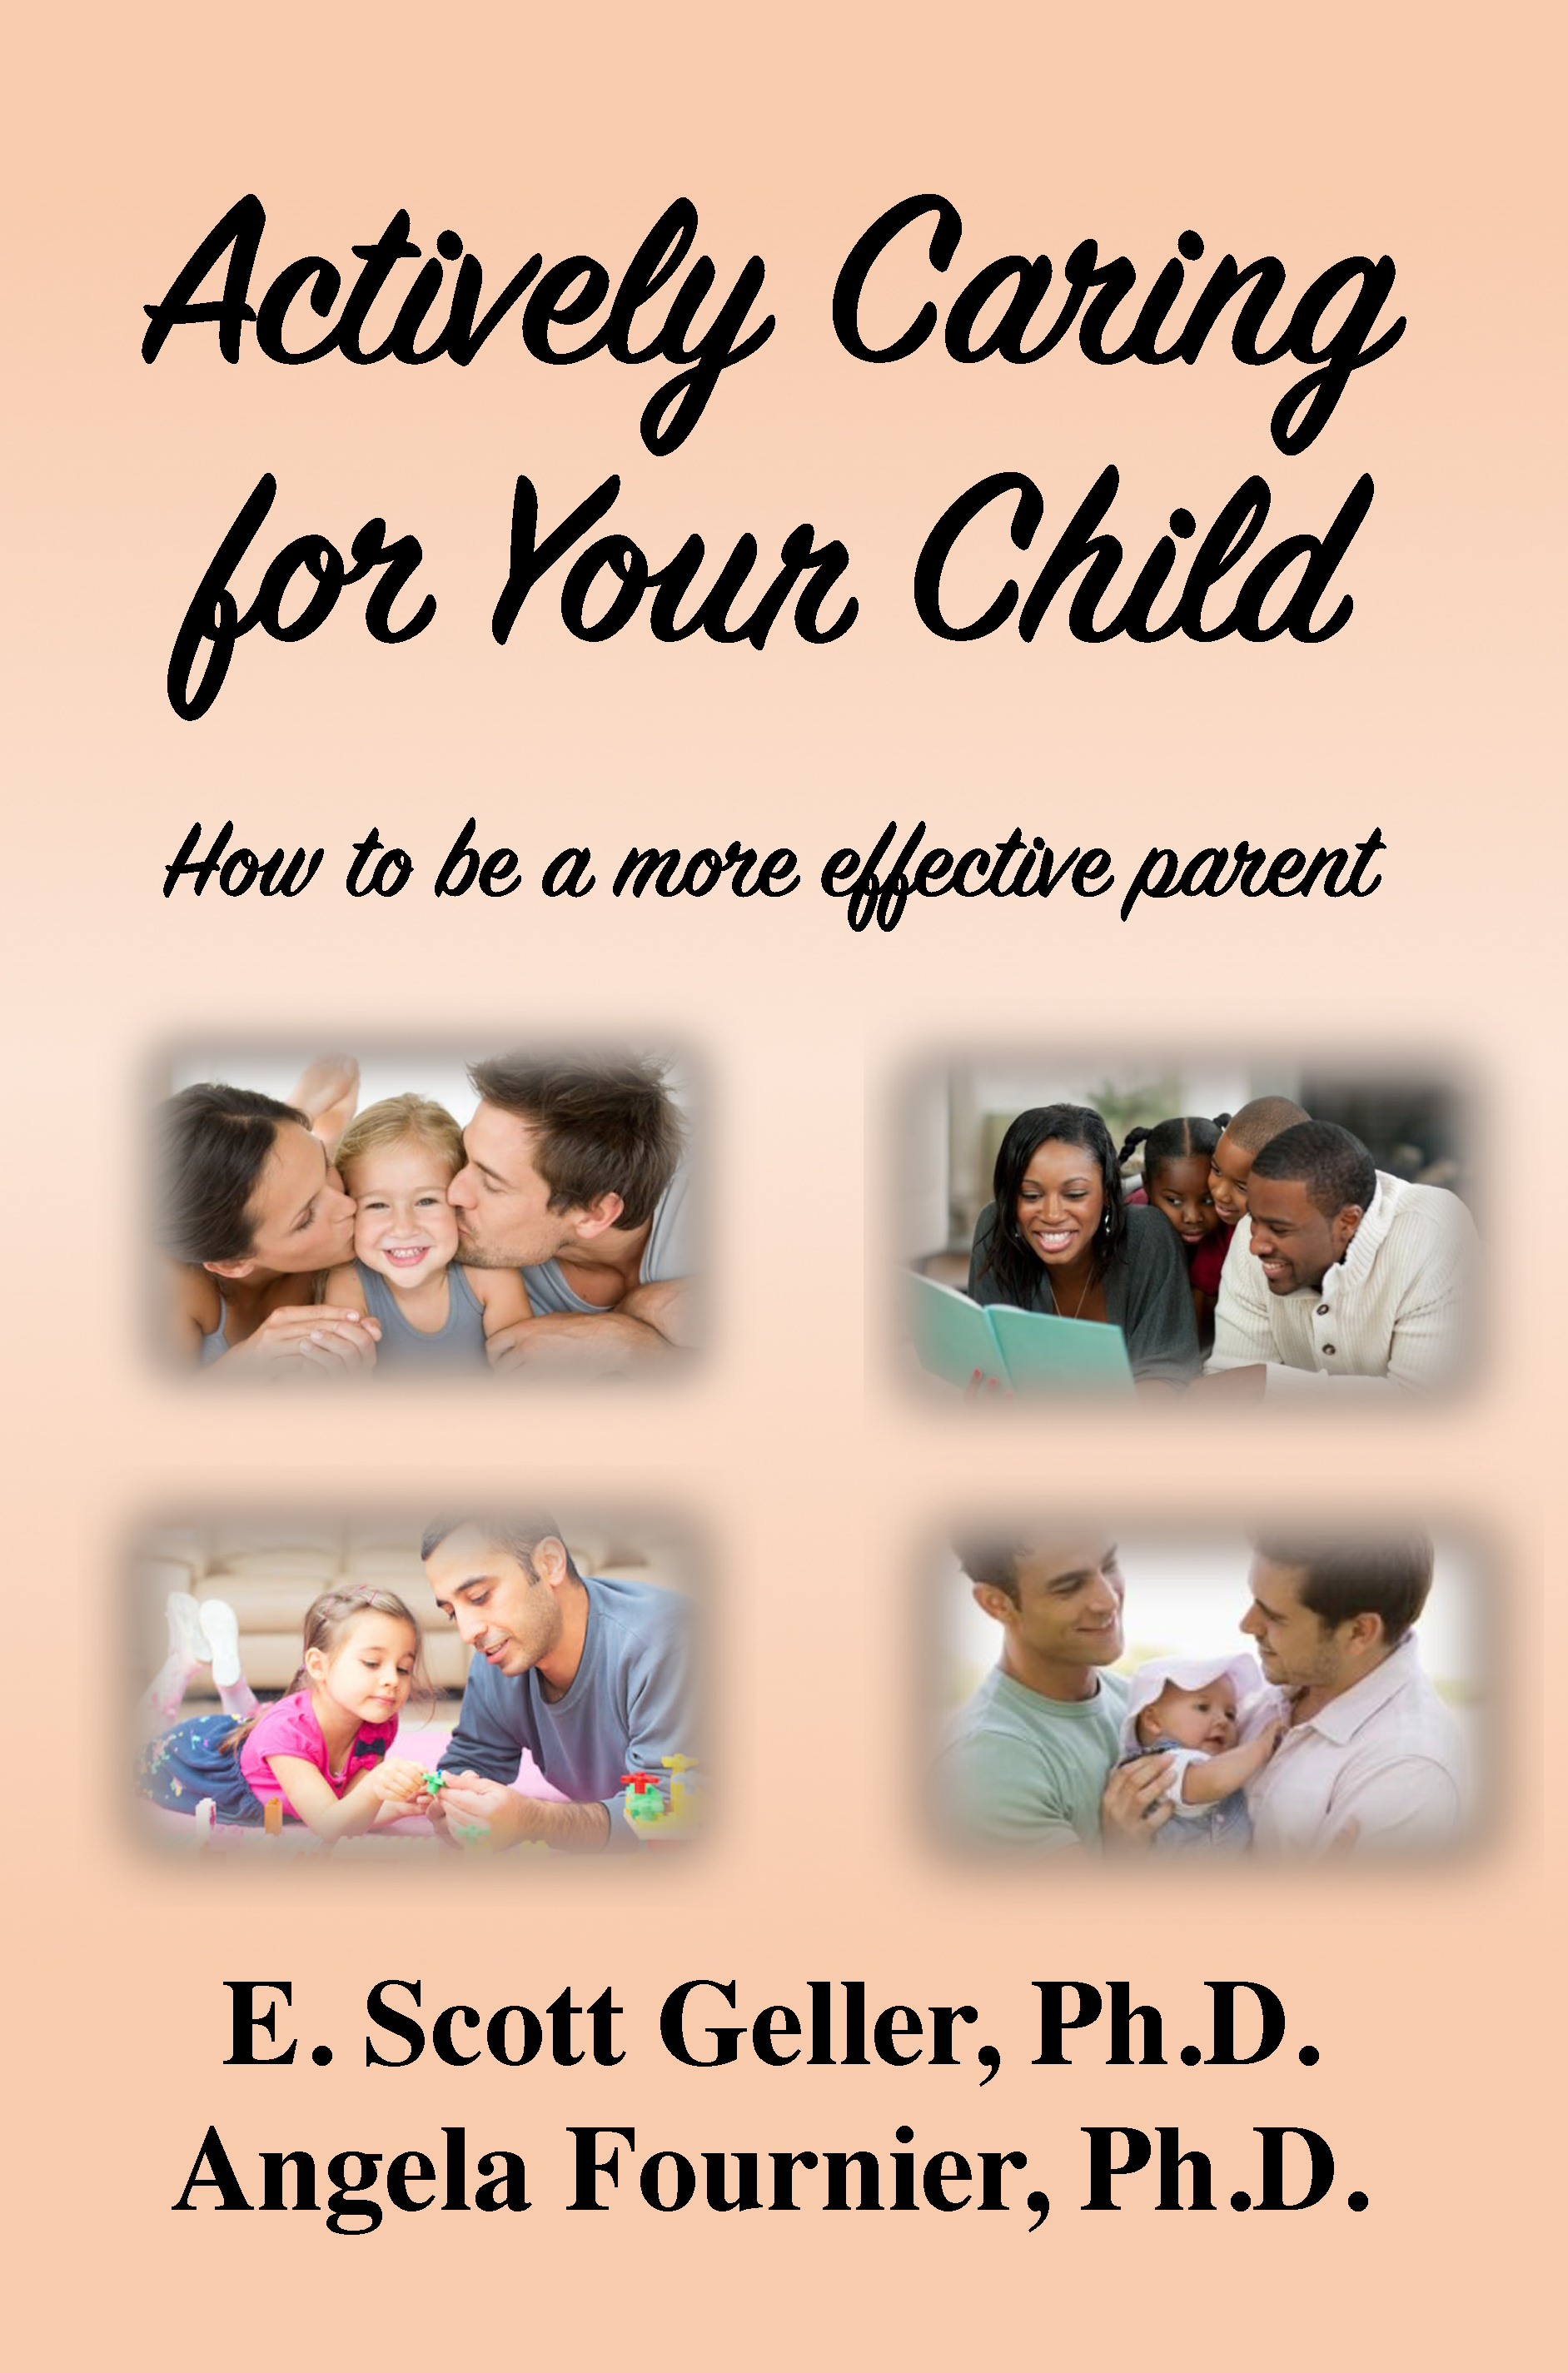 Actively Caring for Your Child: How to be a more effective parent book cover with images of loving families